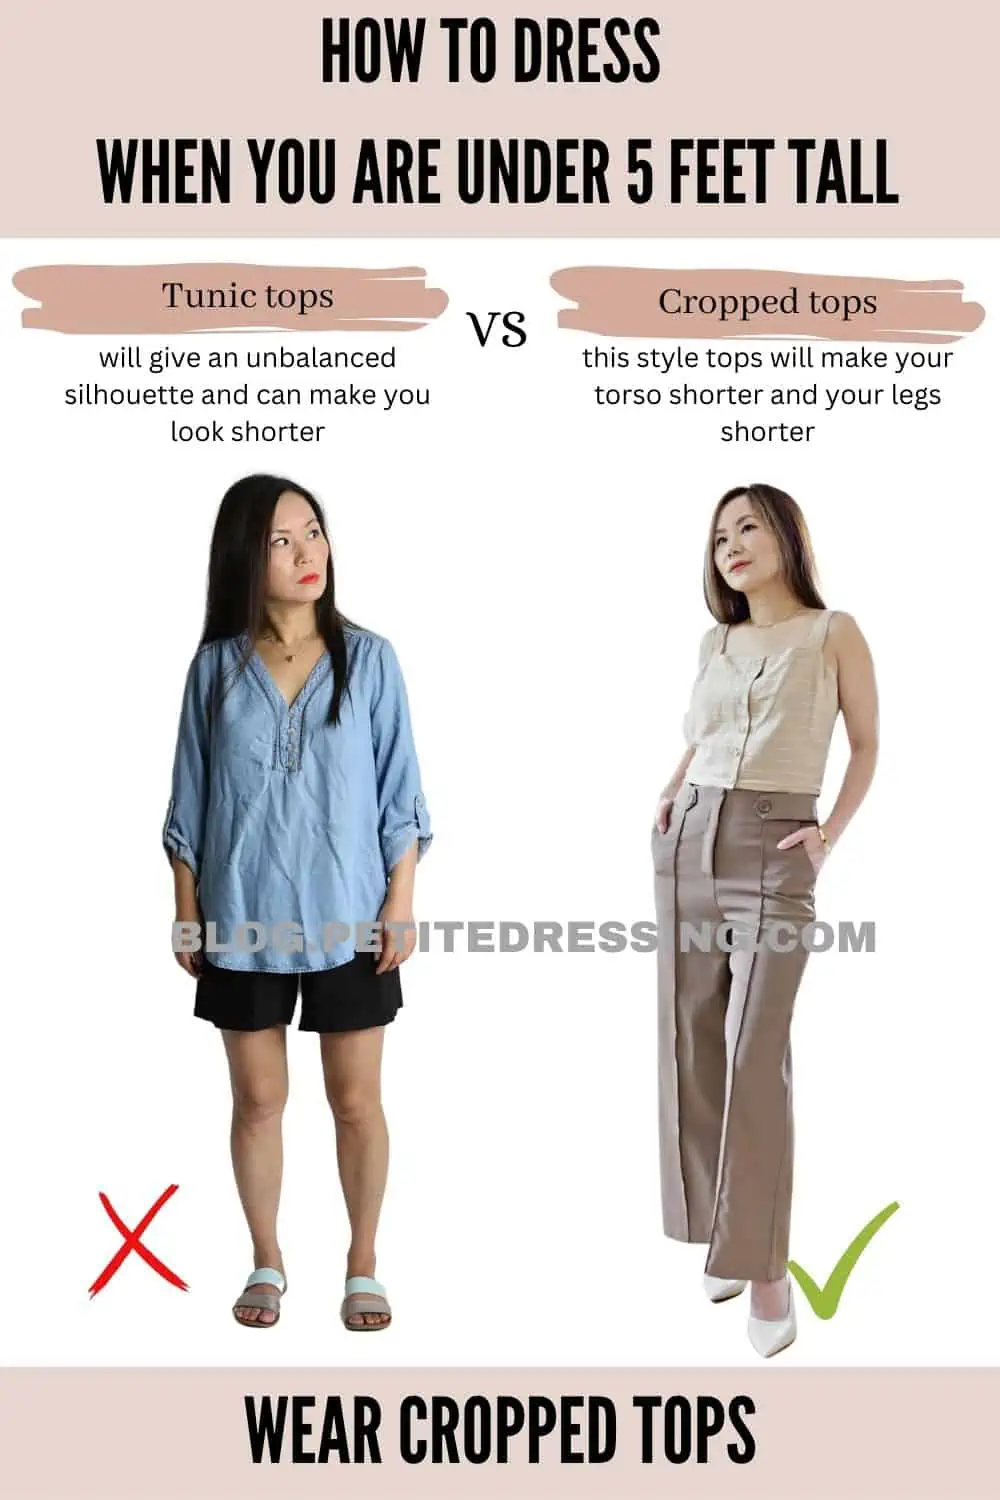 How to Dress when you are under 5 Feet Tall - Petite Dressing